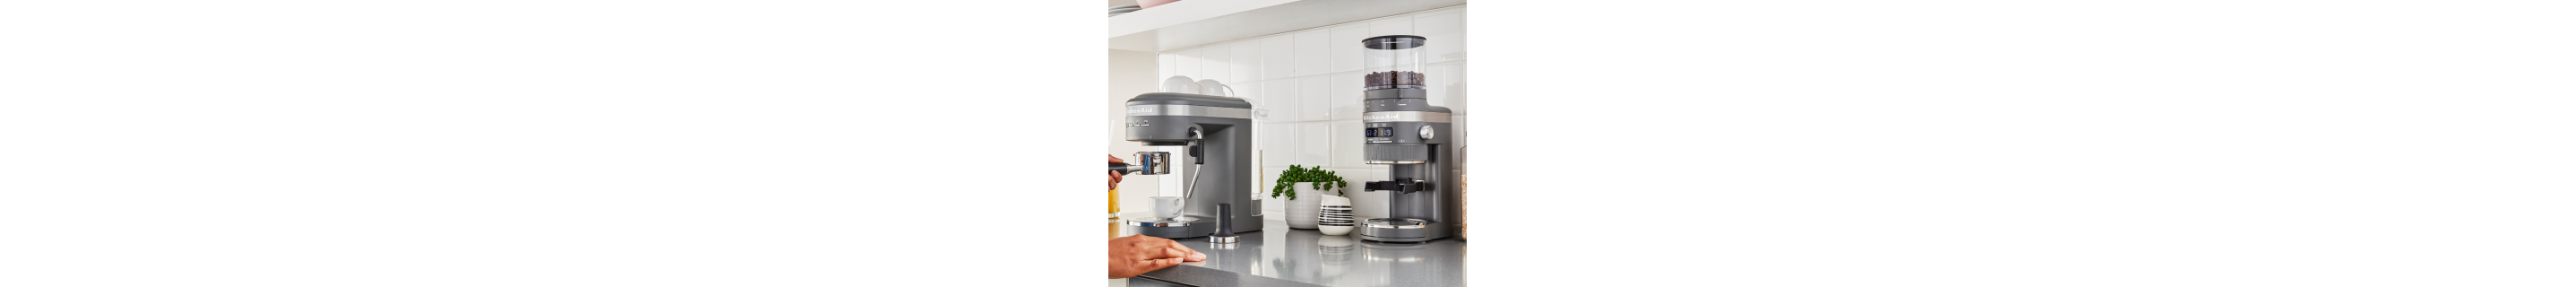 https://kitchenaid-h.assetsadobe.com/is/image/content/dam/business-unit/kitchenaid/en-us/marketing-content/site-assets/page-content/pinch-of-help/how-to-choose-a-coffee-grinder/Material%20and%20Durability.png?fit=constrain&fmt=png-alpha&wid=2875